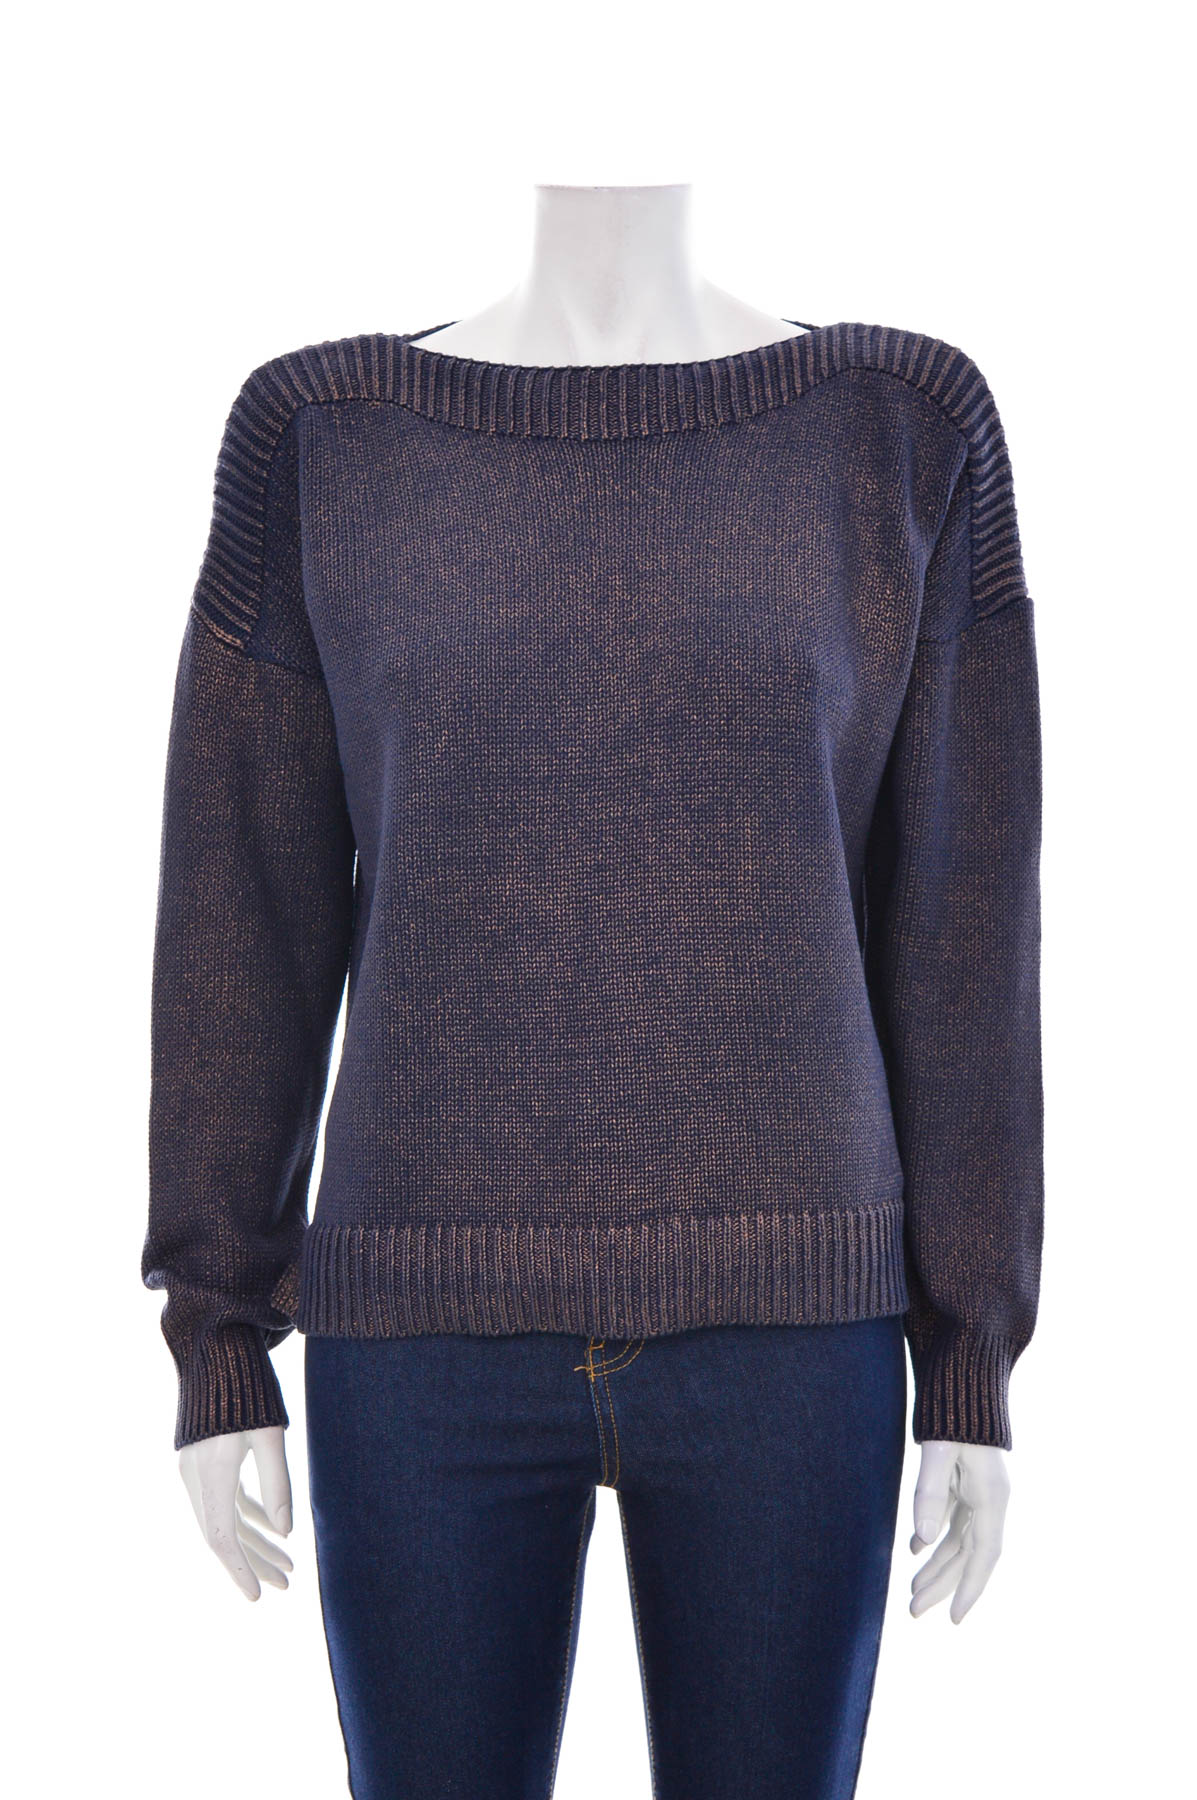 Women's sweater - QS by S.Oliver - 0